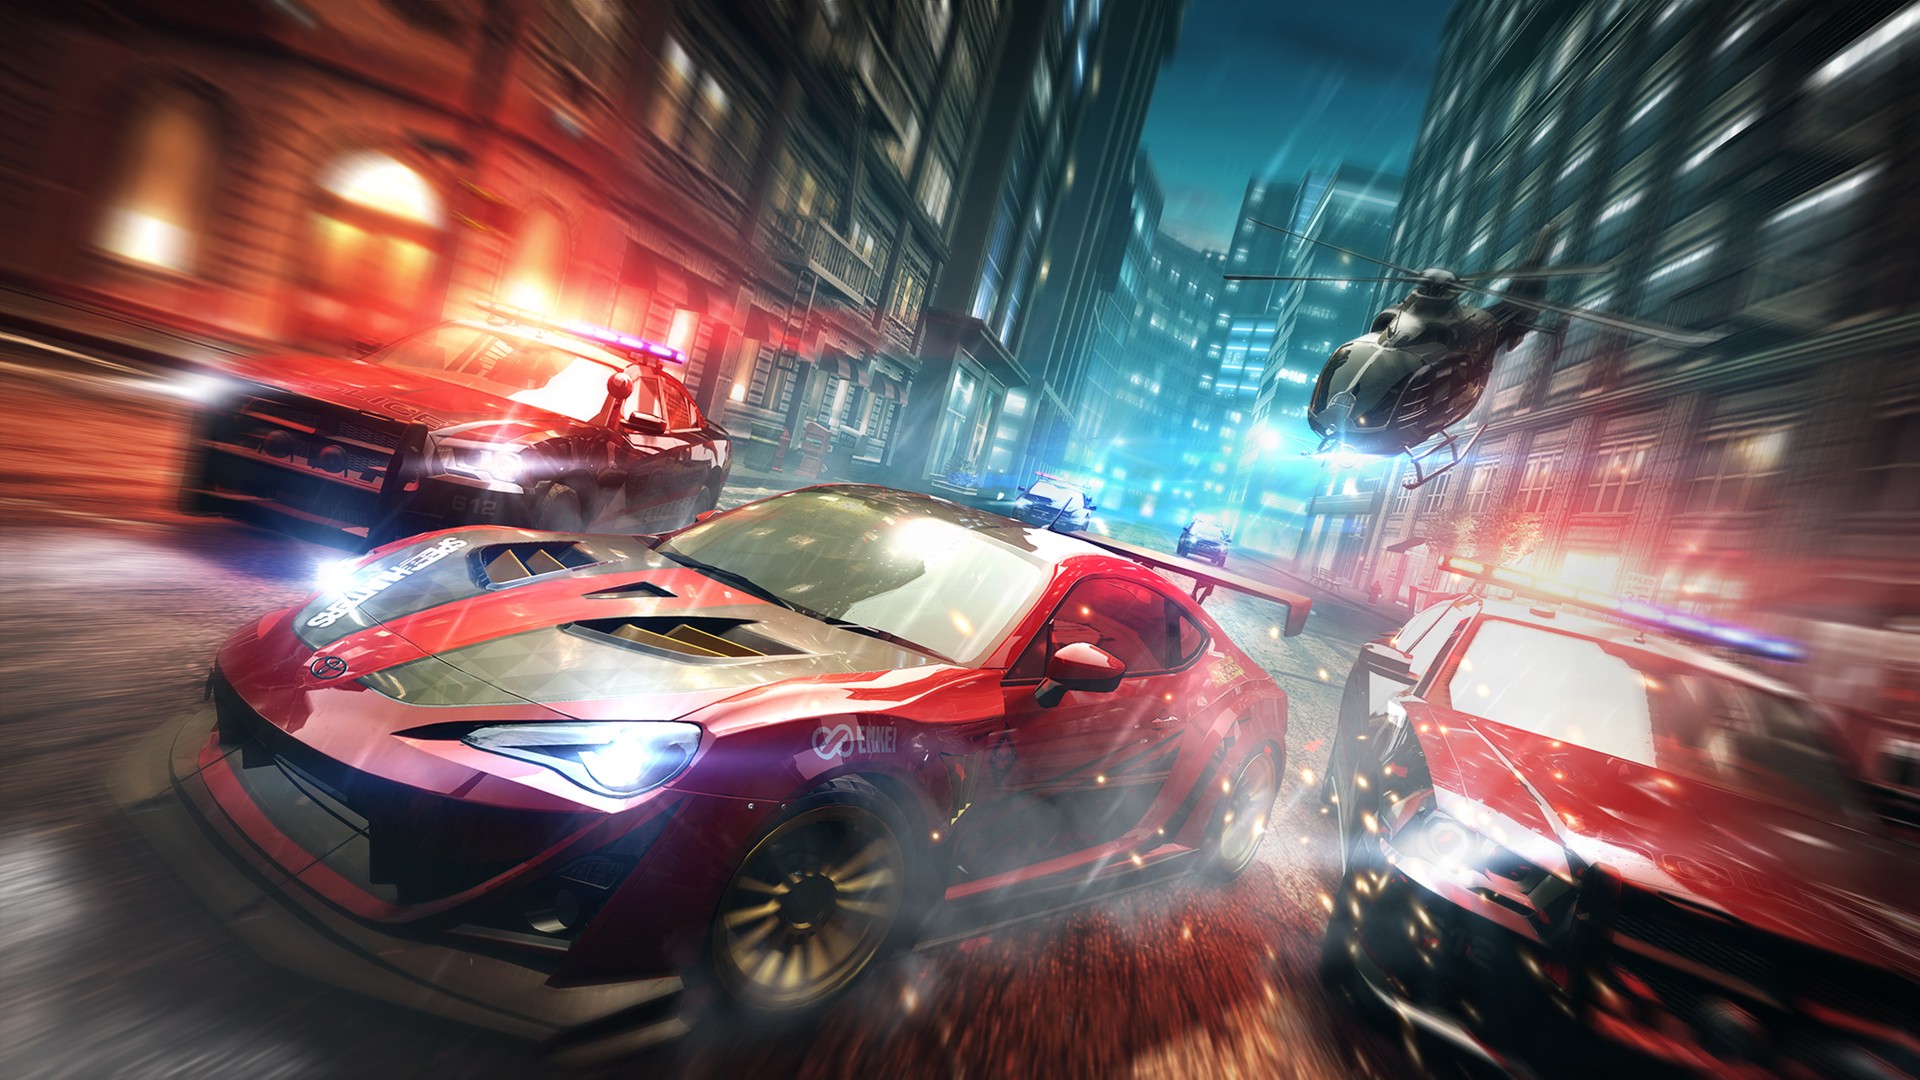 Need for Speed: No Limits, Video games, Night, City, Toyota 86, Tuning, Police cars, Motion blur, Dodge Charger, Helicopters, Need for Speed Wallpaper